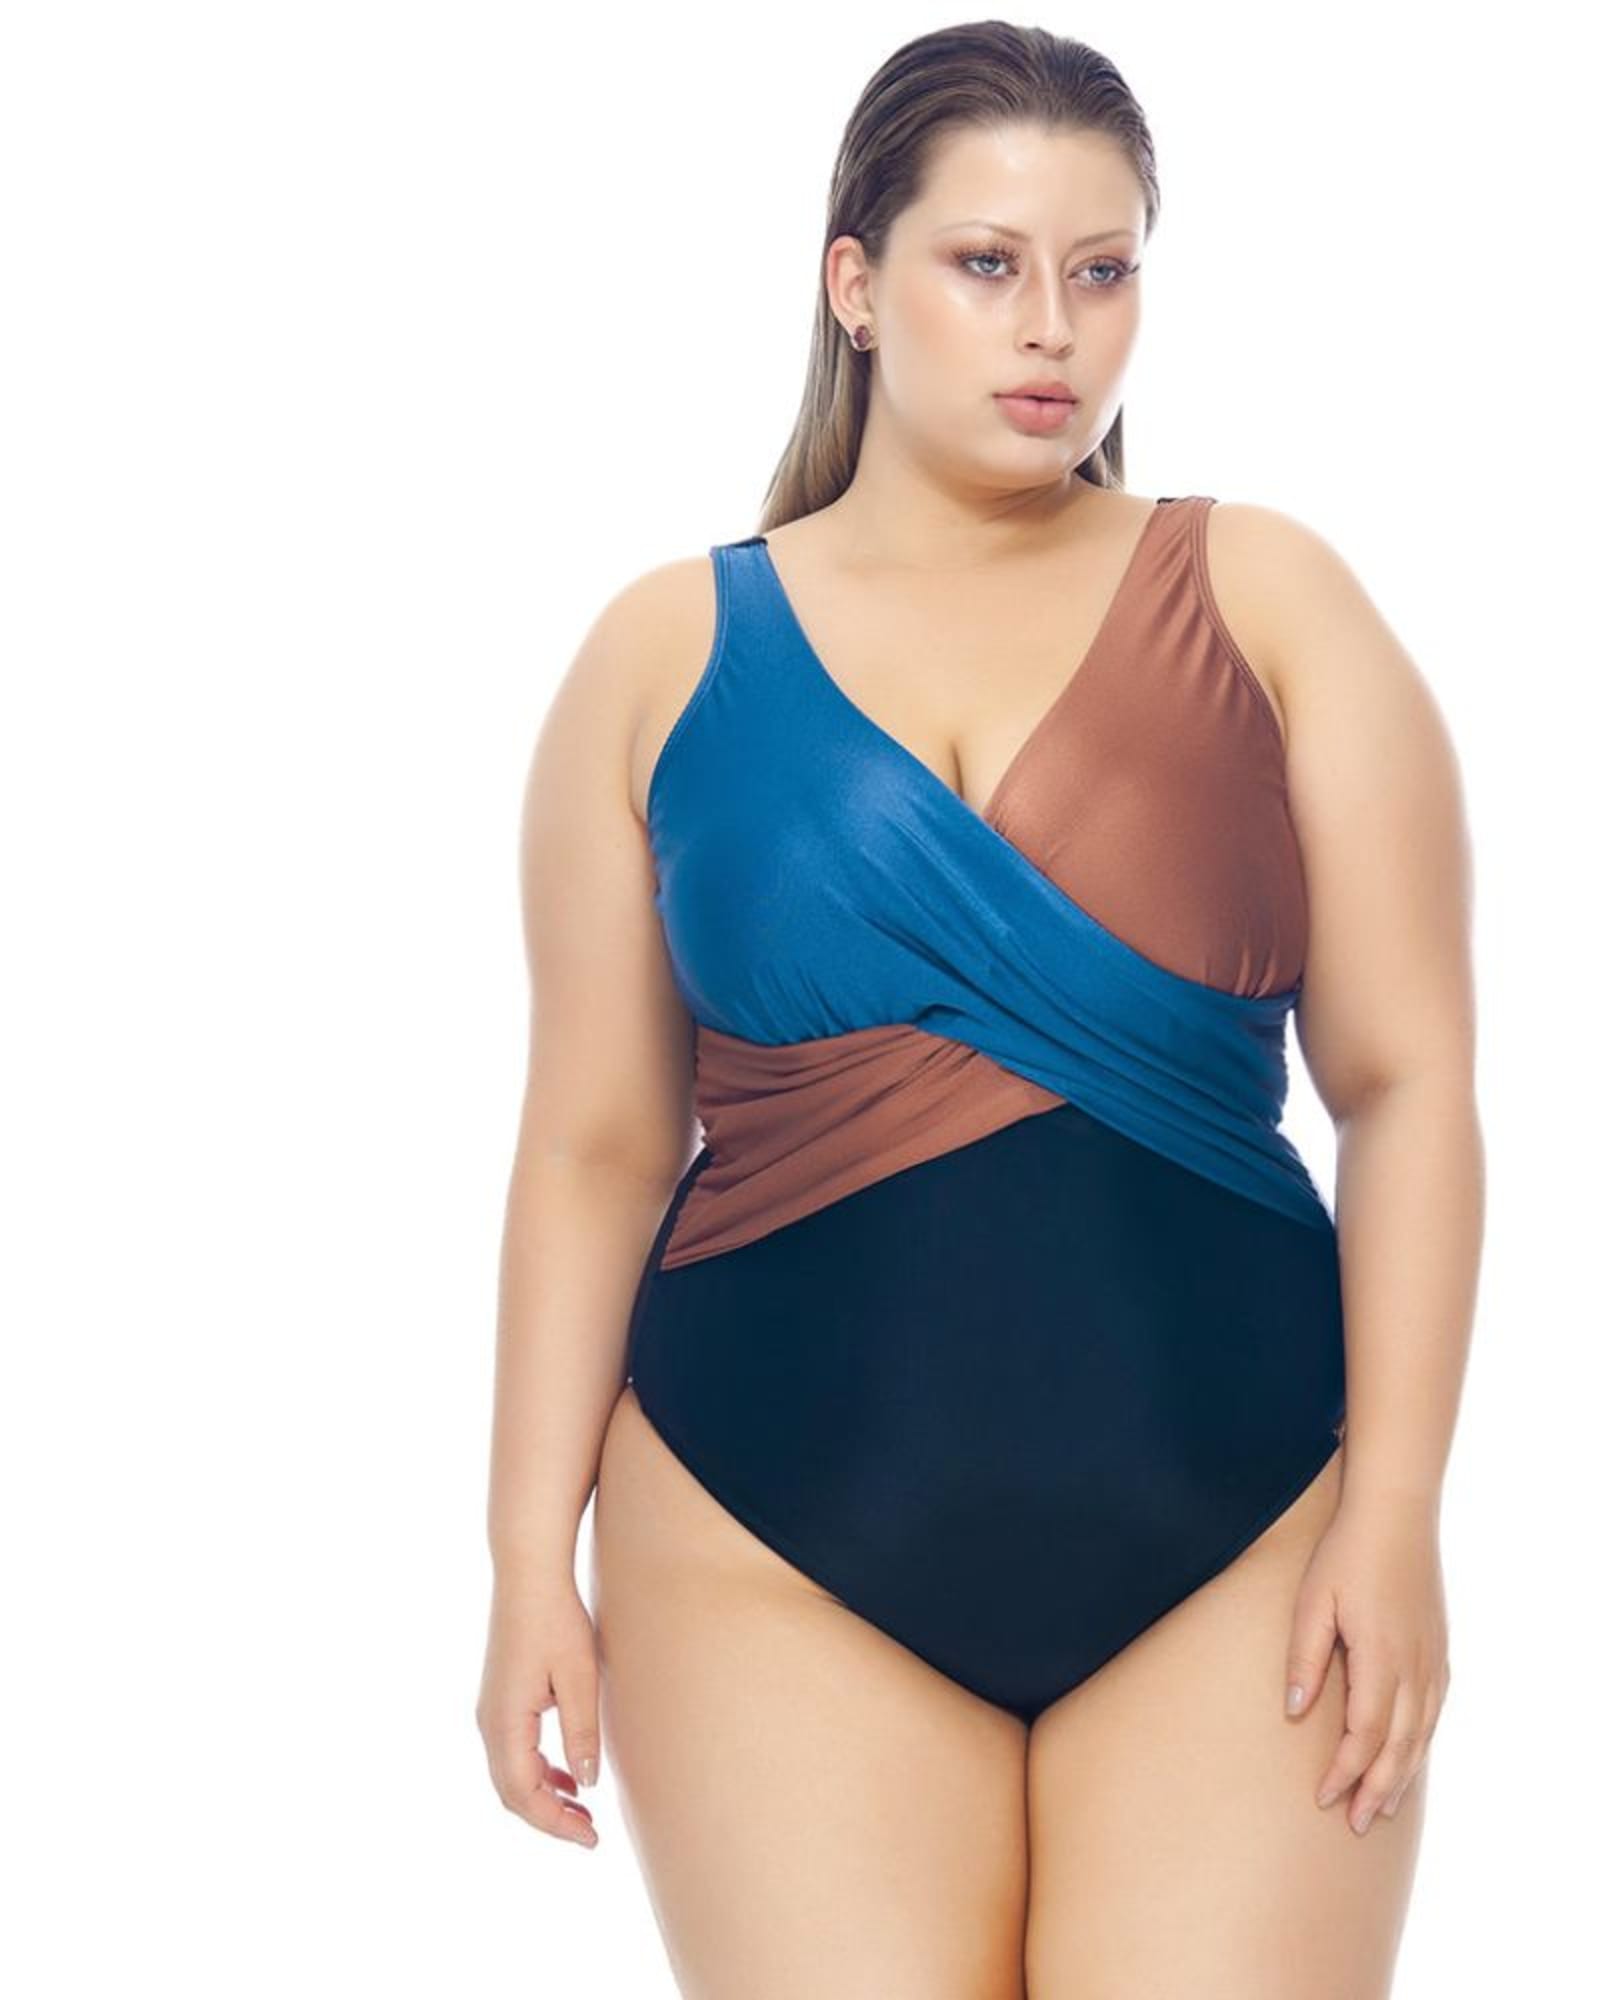 Swimsuit With Cross-Over Detail At The Bust | Multicolor